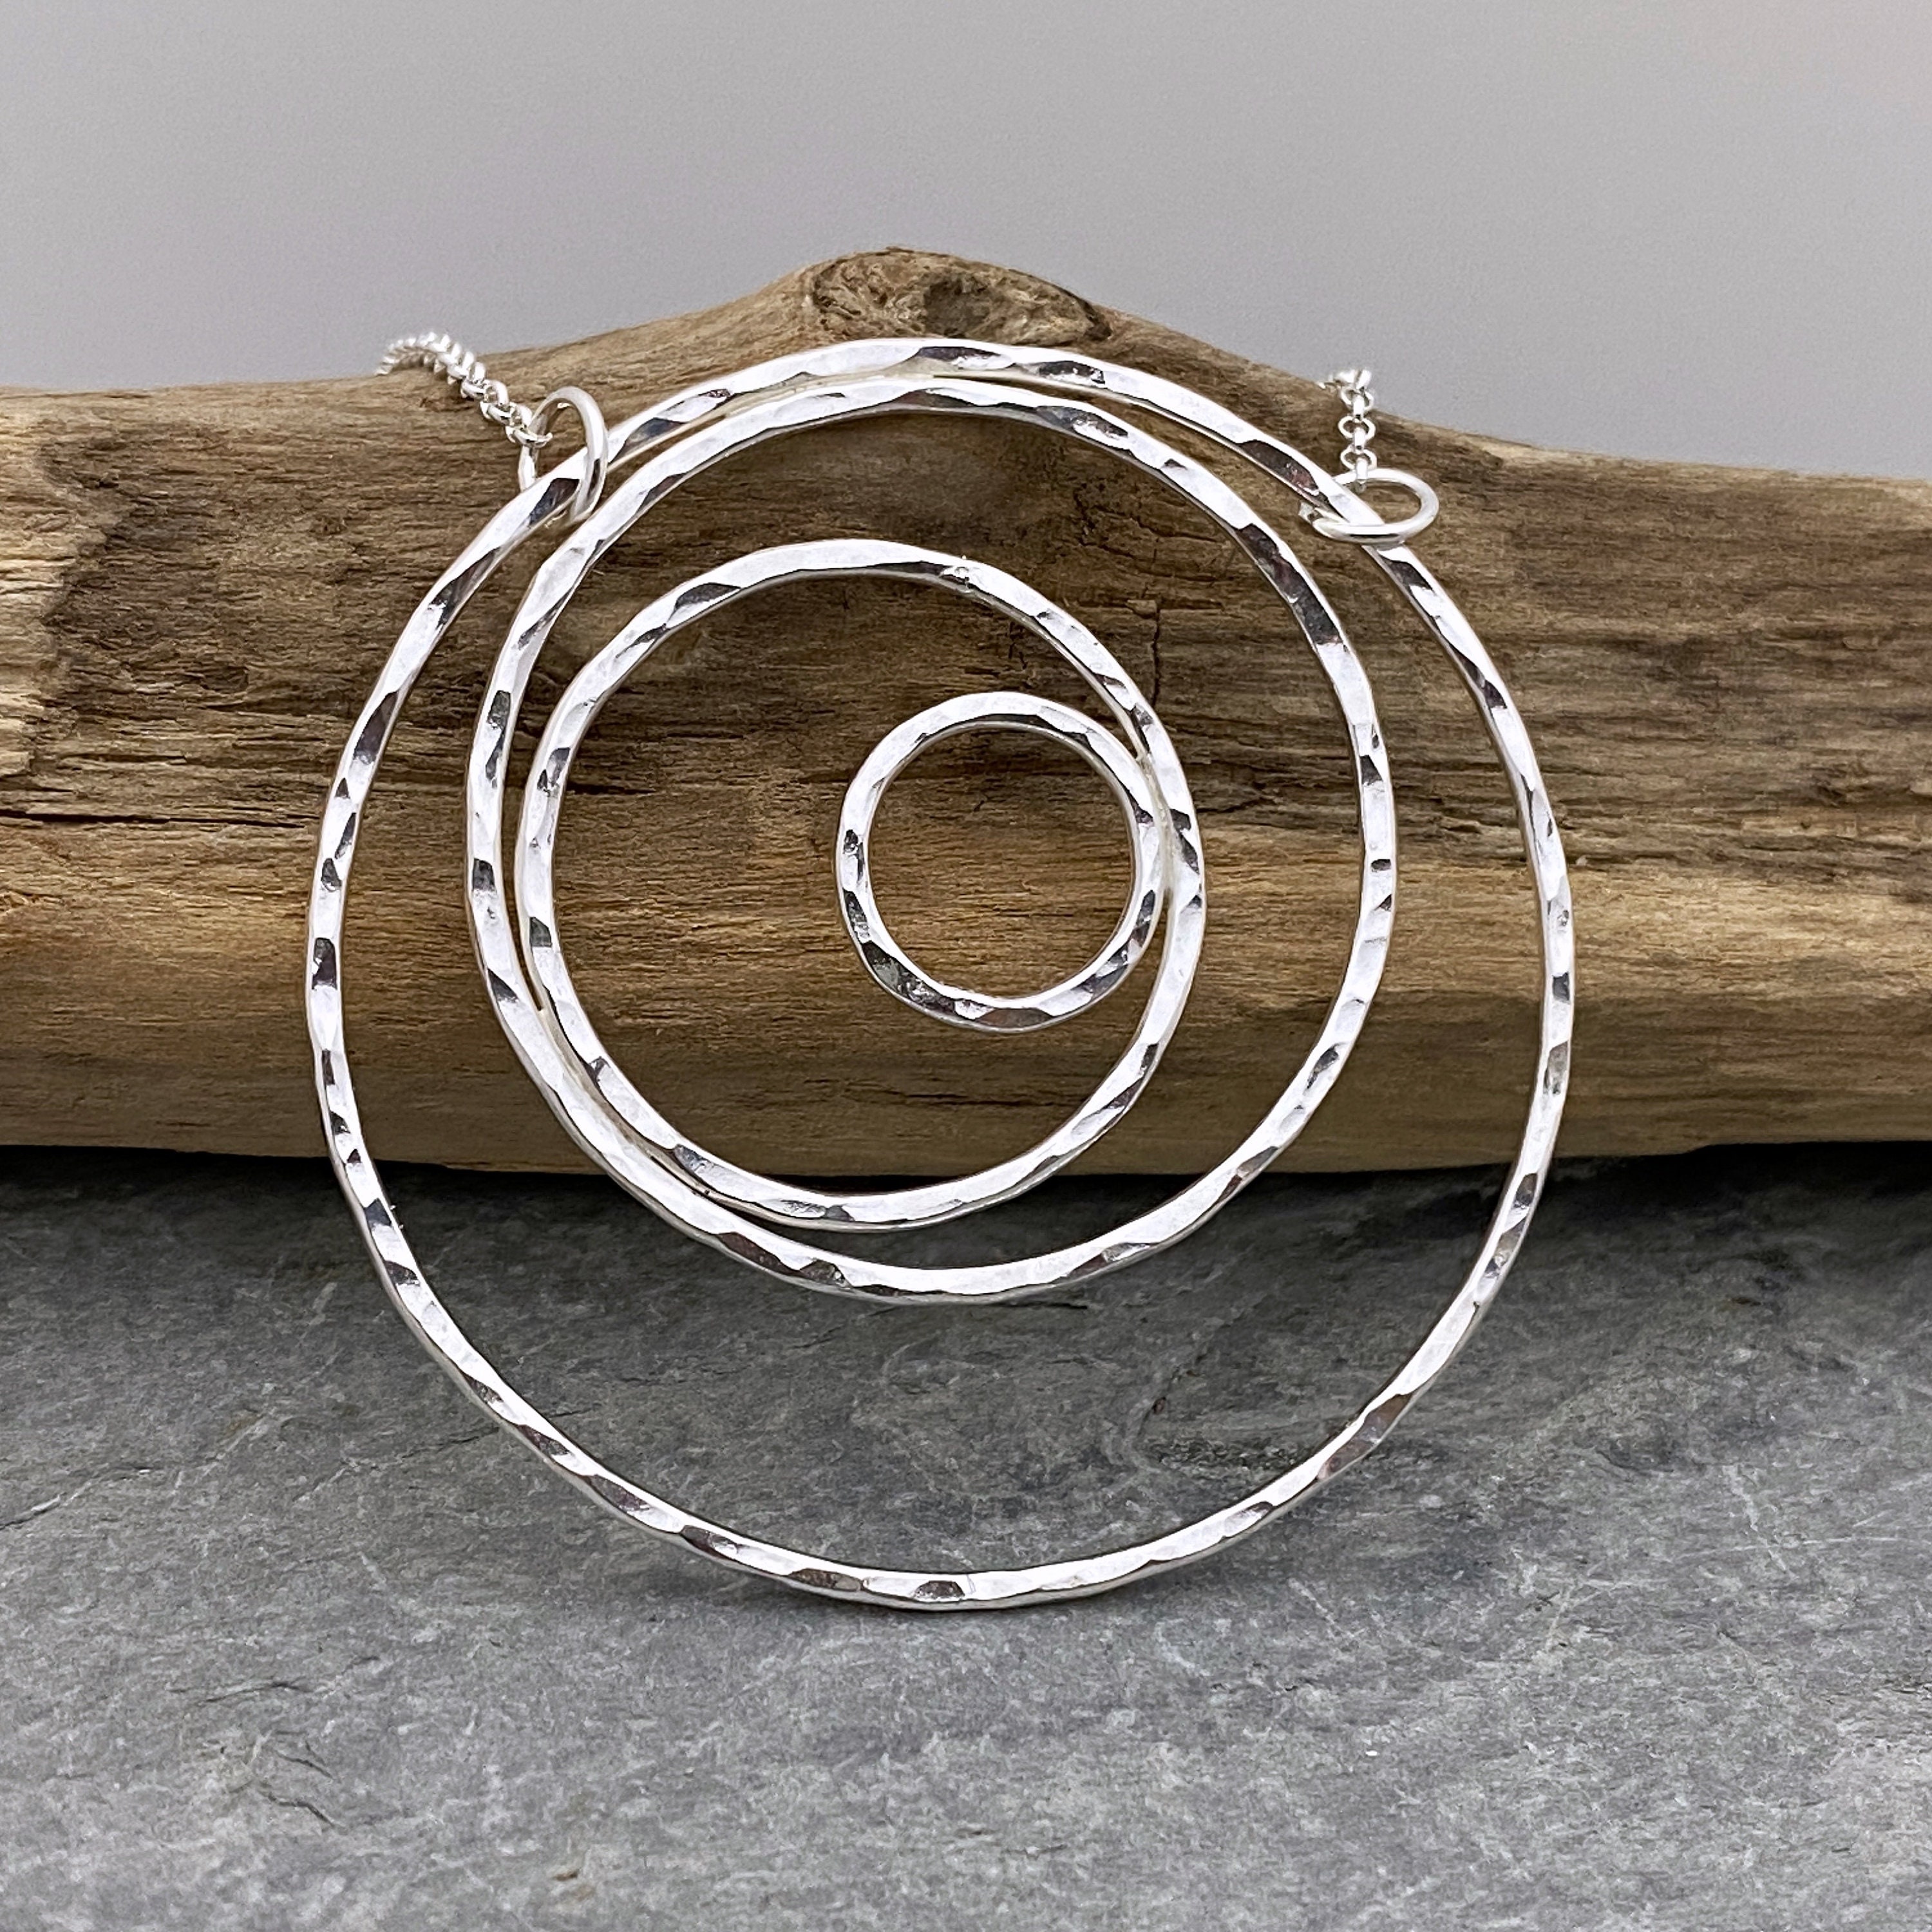 Silver Circle Necklace, Large Circles Pendant, Hammered Silver Pendant On Chain, Rings Necklace